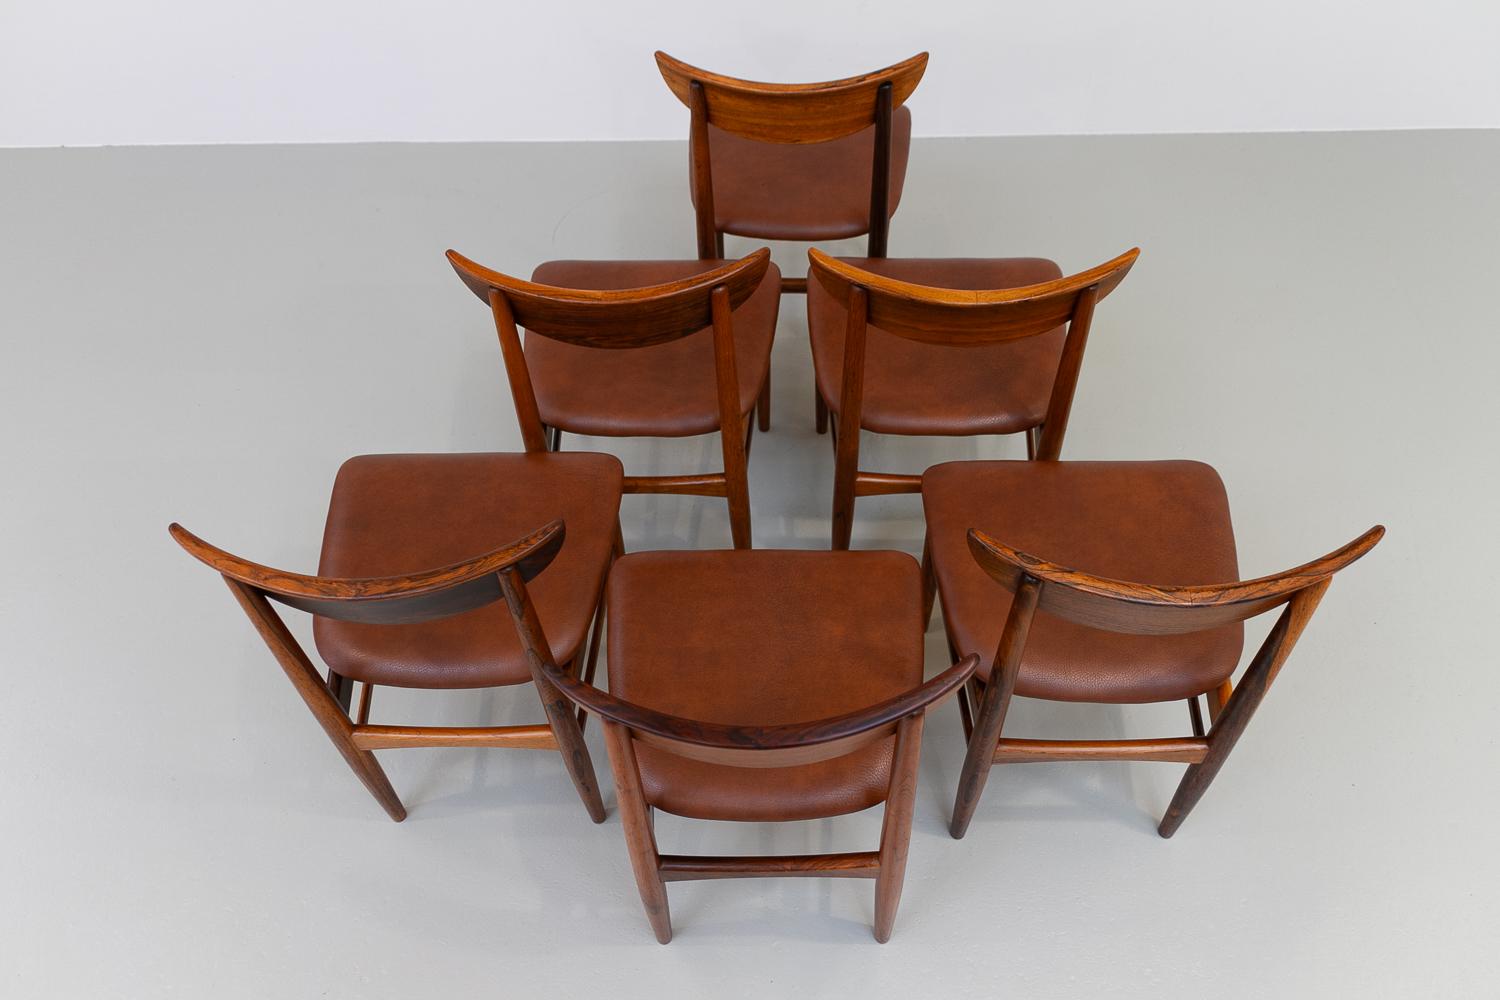 Vintage Danish Rosewood Dining Chairs by E.W. Bach for Skovby, 1960s. Set of 6. For Sale 6